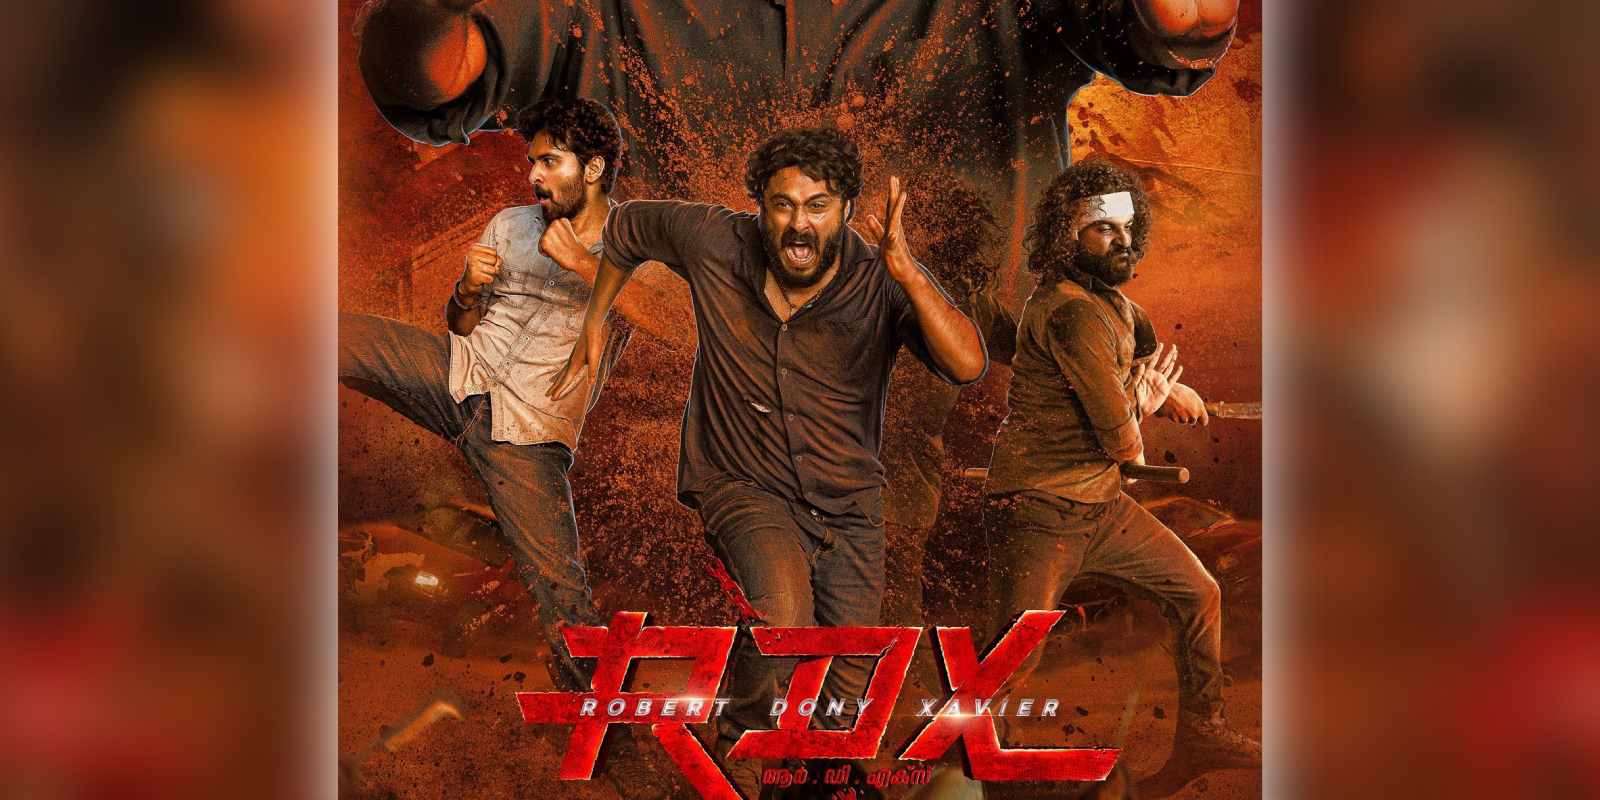 rdx malayalam movie review in tamil